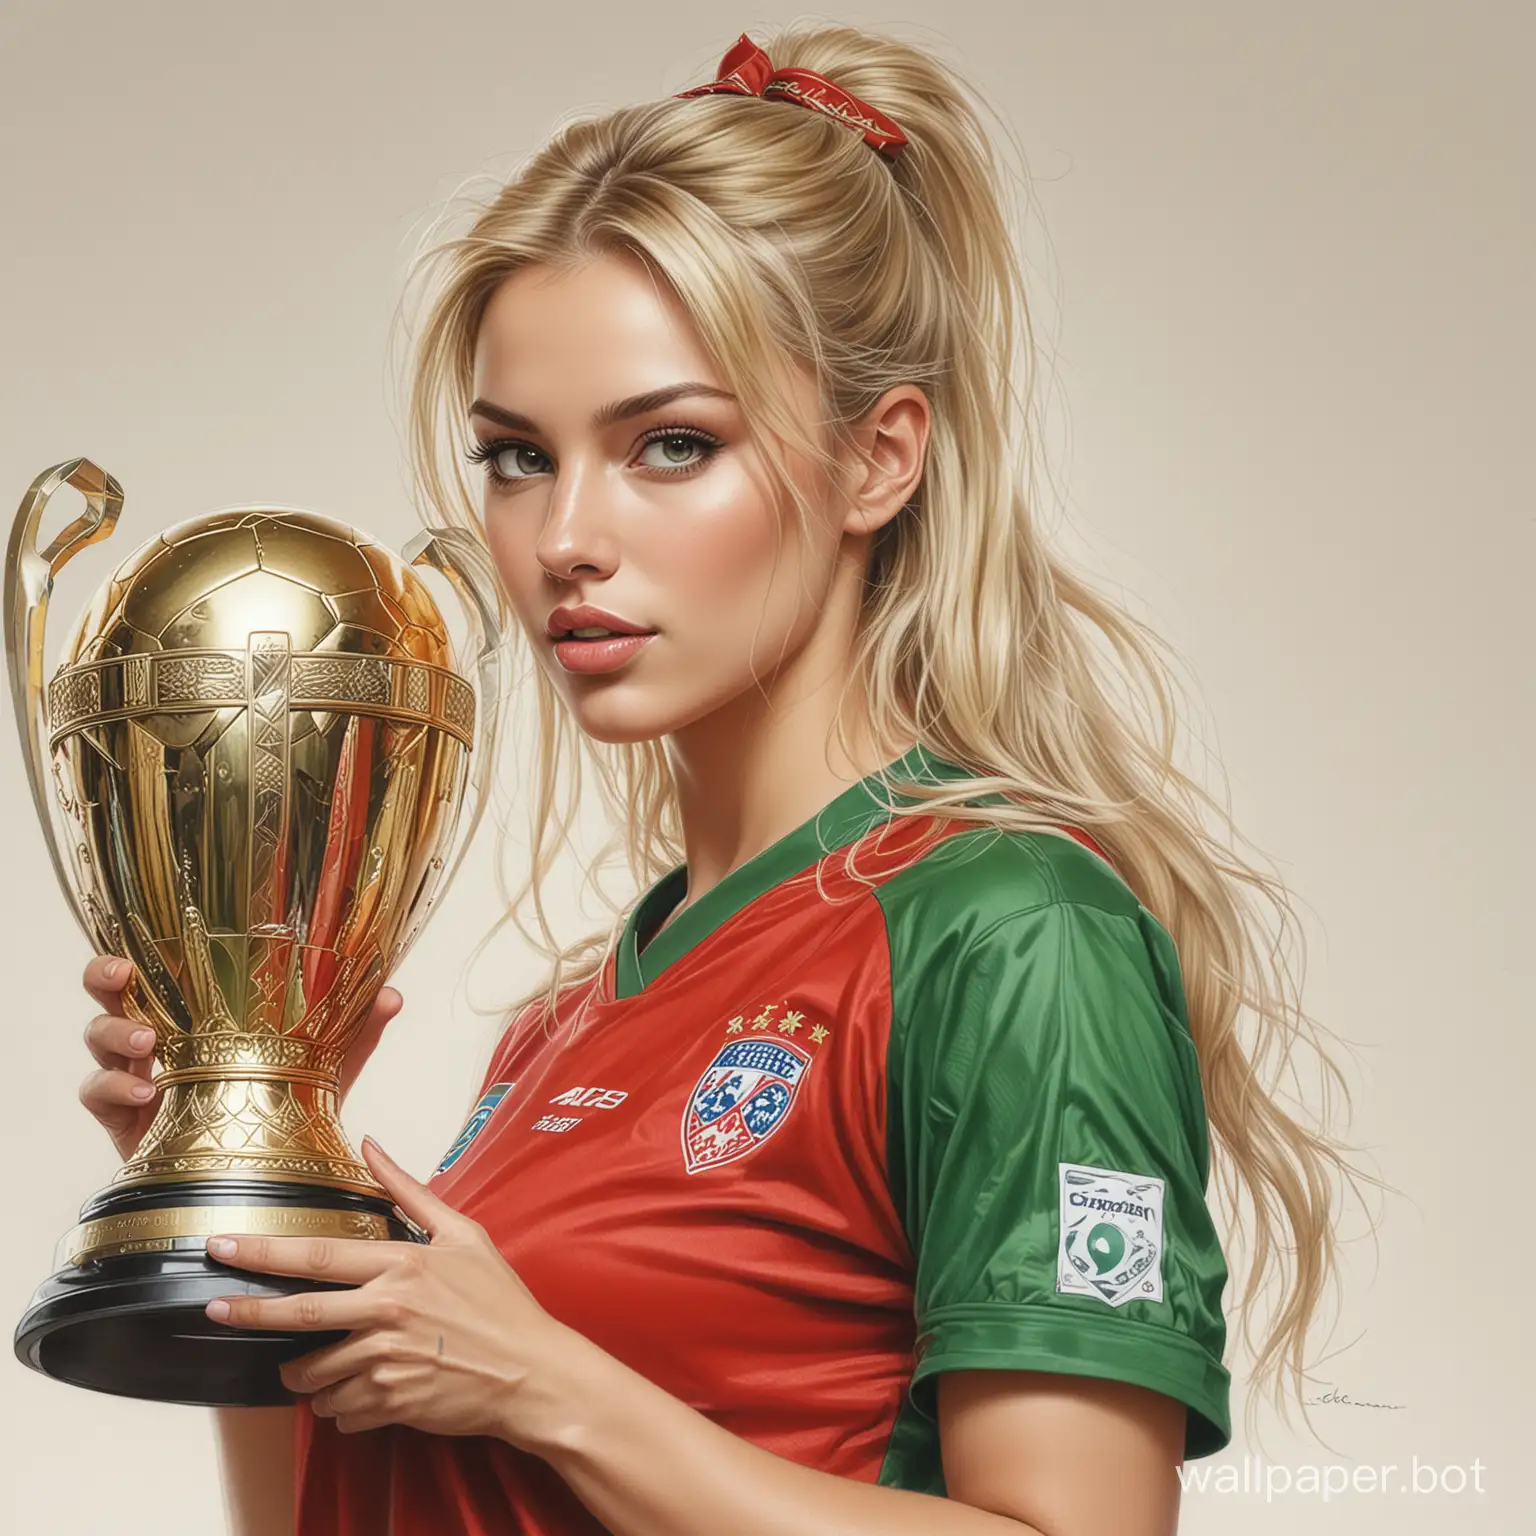 Sketch Irina Chashchina, 25 years old, blonde hair, cup size 7, narrow waist, in green-red soccer uniform, holding the big Champions Cup on a white background, very realistic drawing with colored pencils by Luis Royo